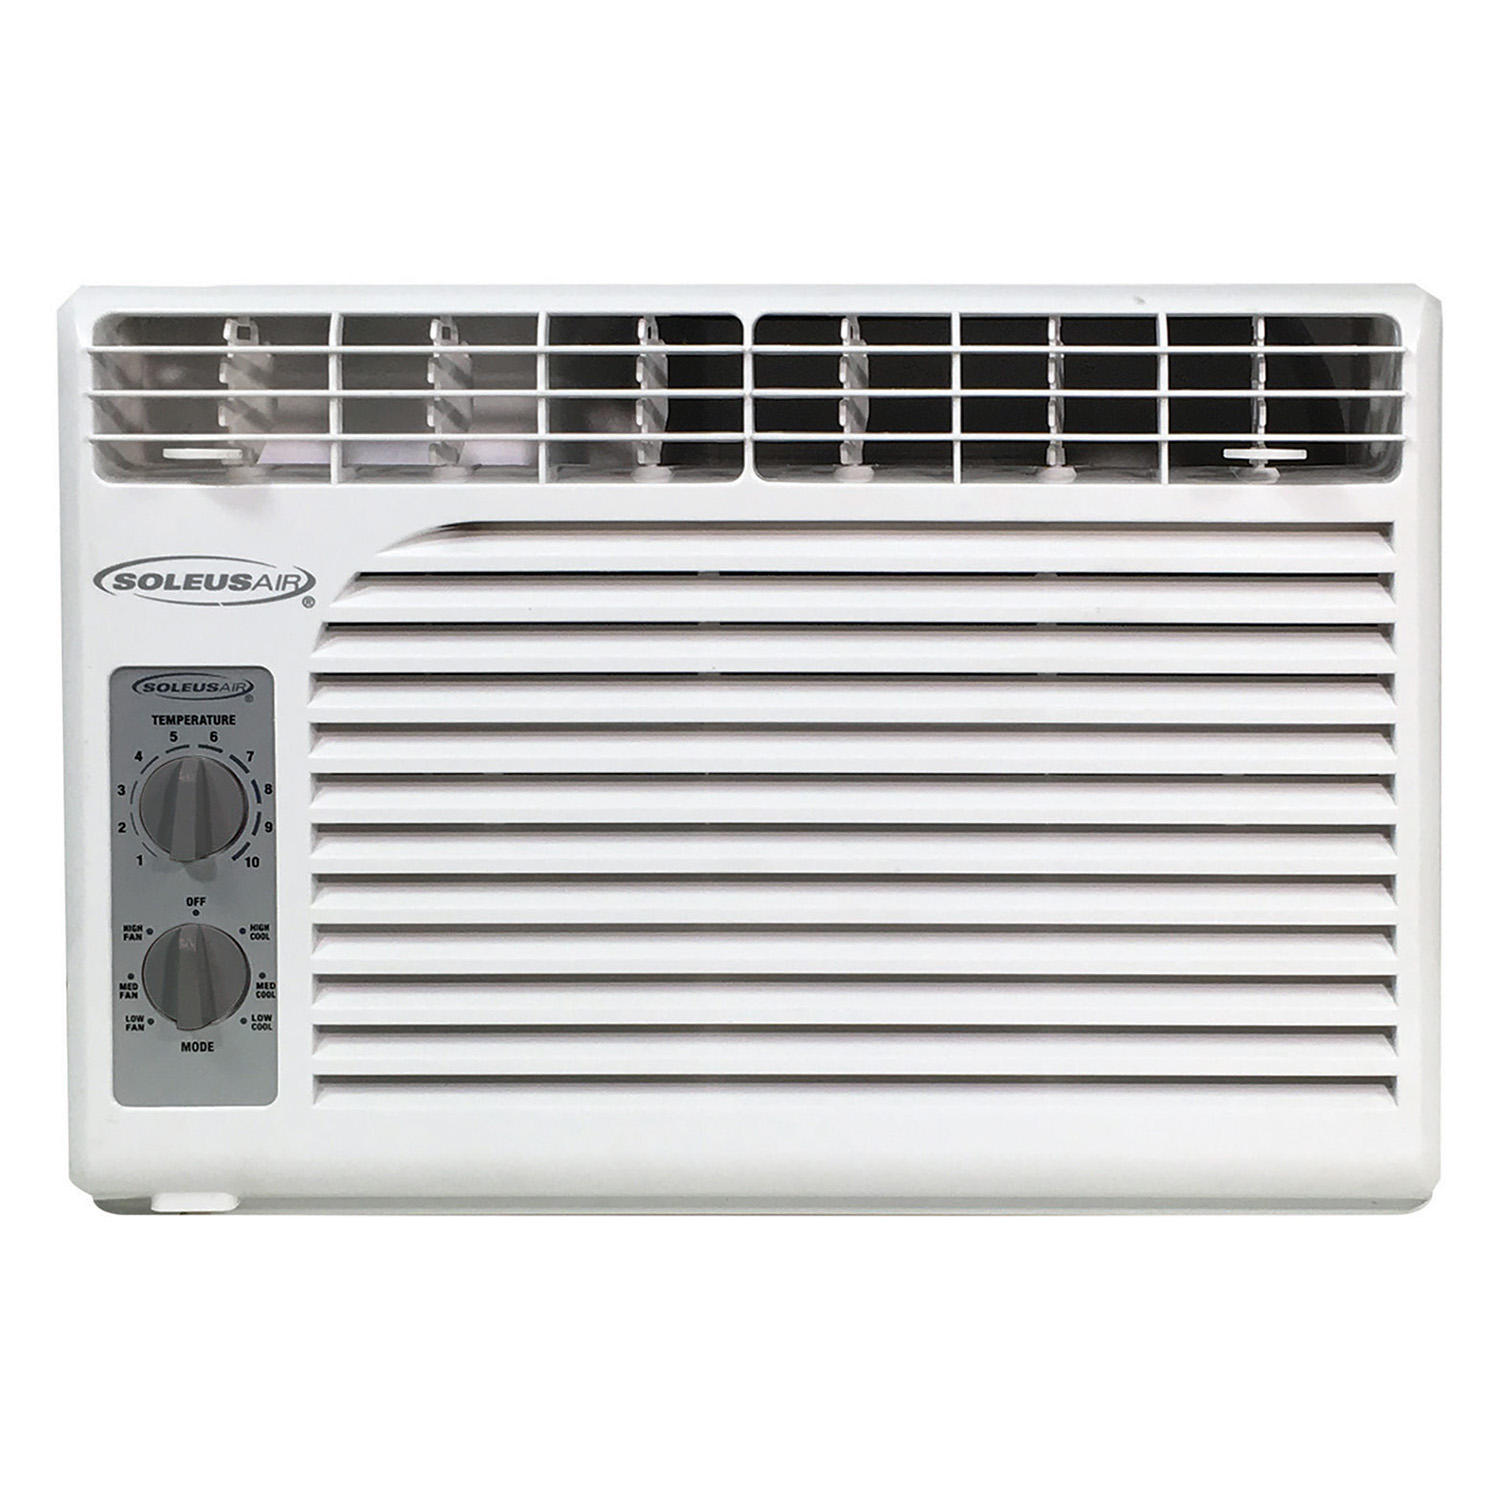 SoleusAir WS1-05M2-02 5,000 BTU 115V Window-Mounted Air Conditioner with Mechanical Controls